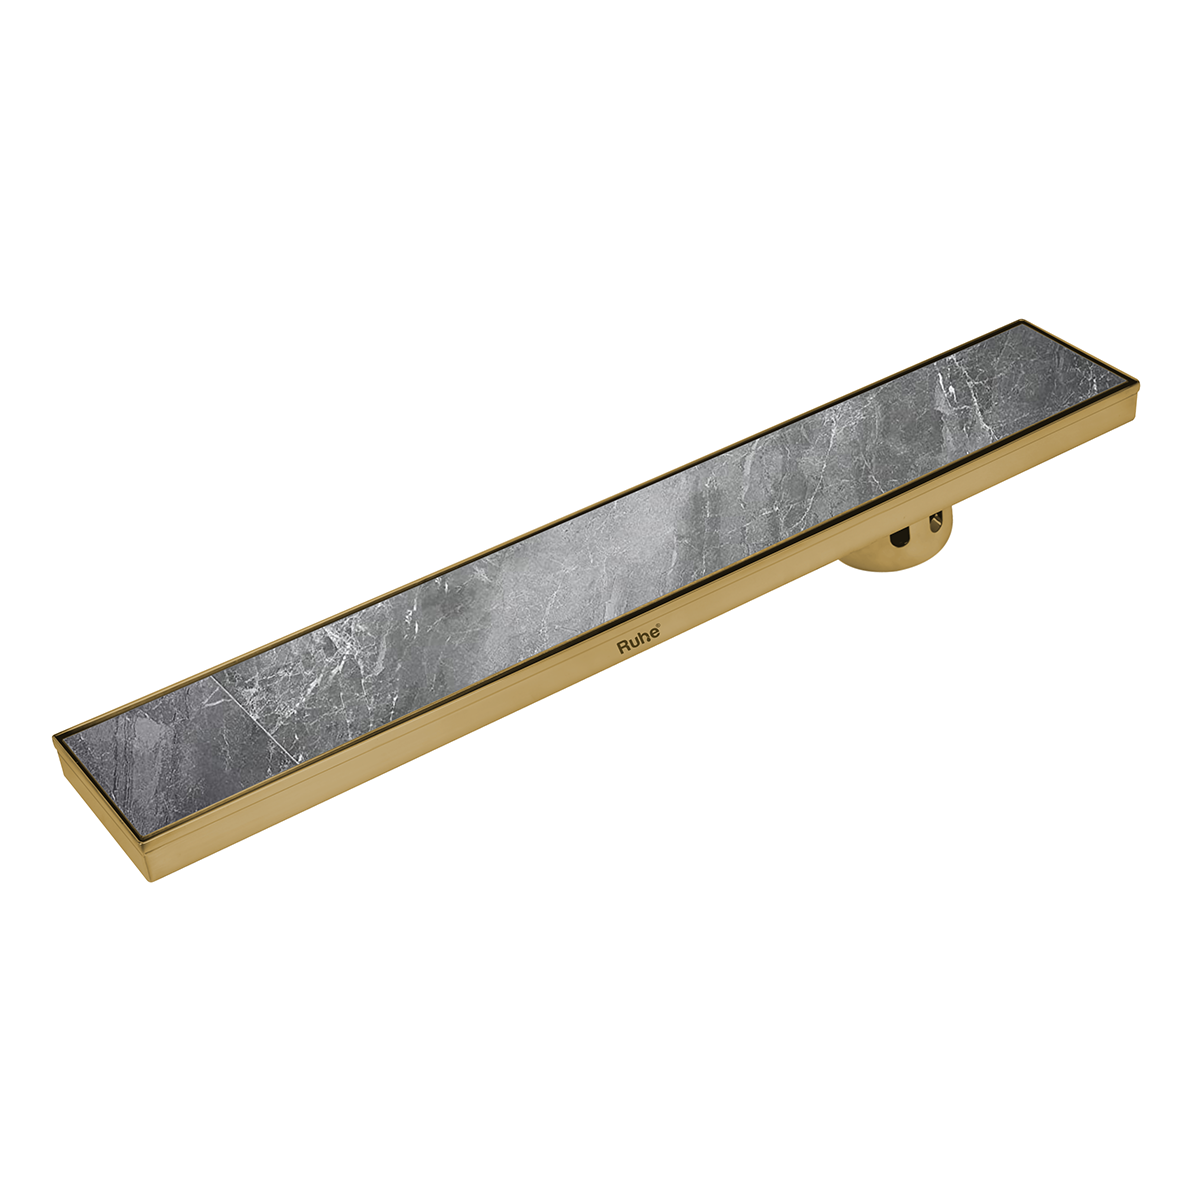 Marble Insert Shower Drain Channel (40 x 4 Inches) YELLOW GOLD PVD Coated